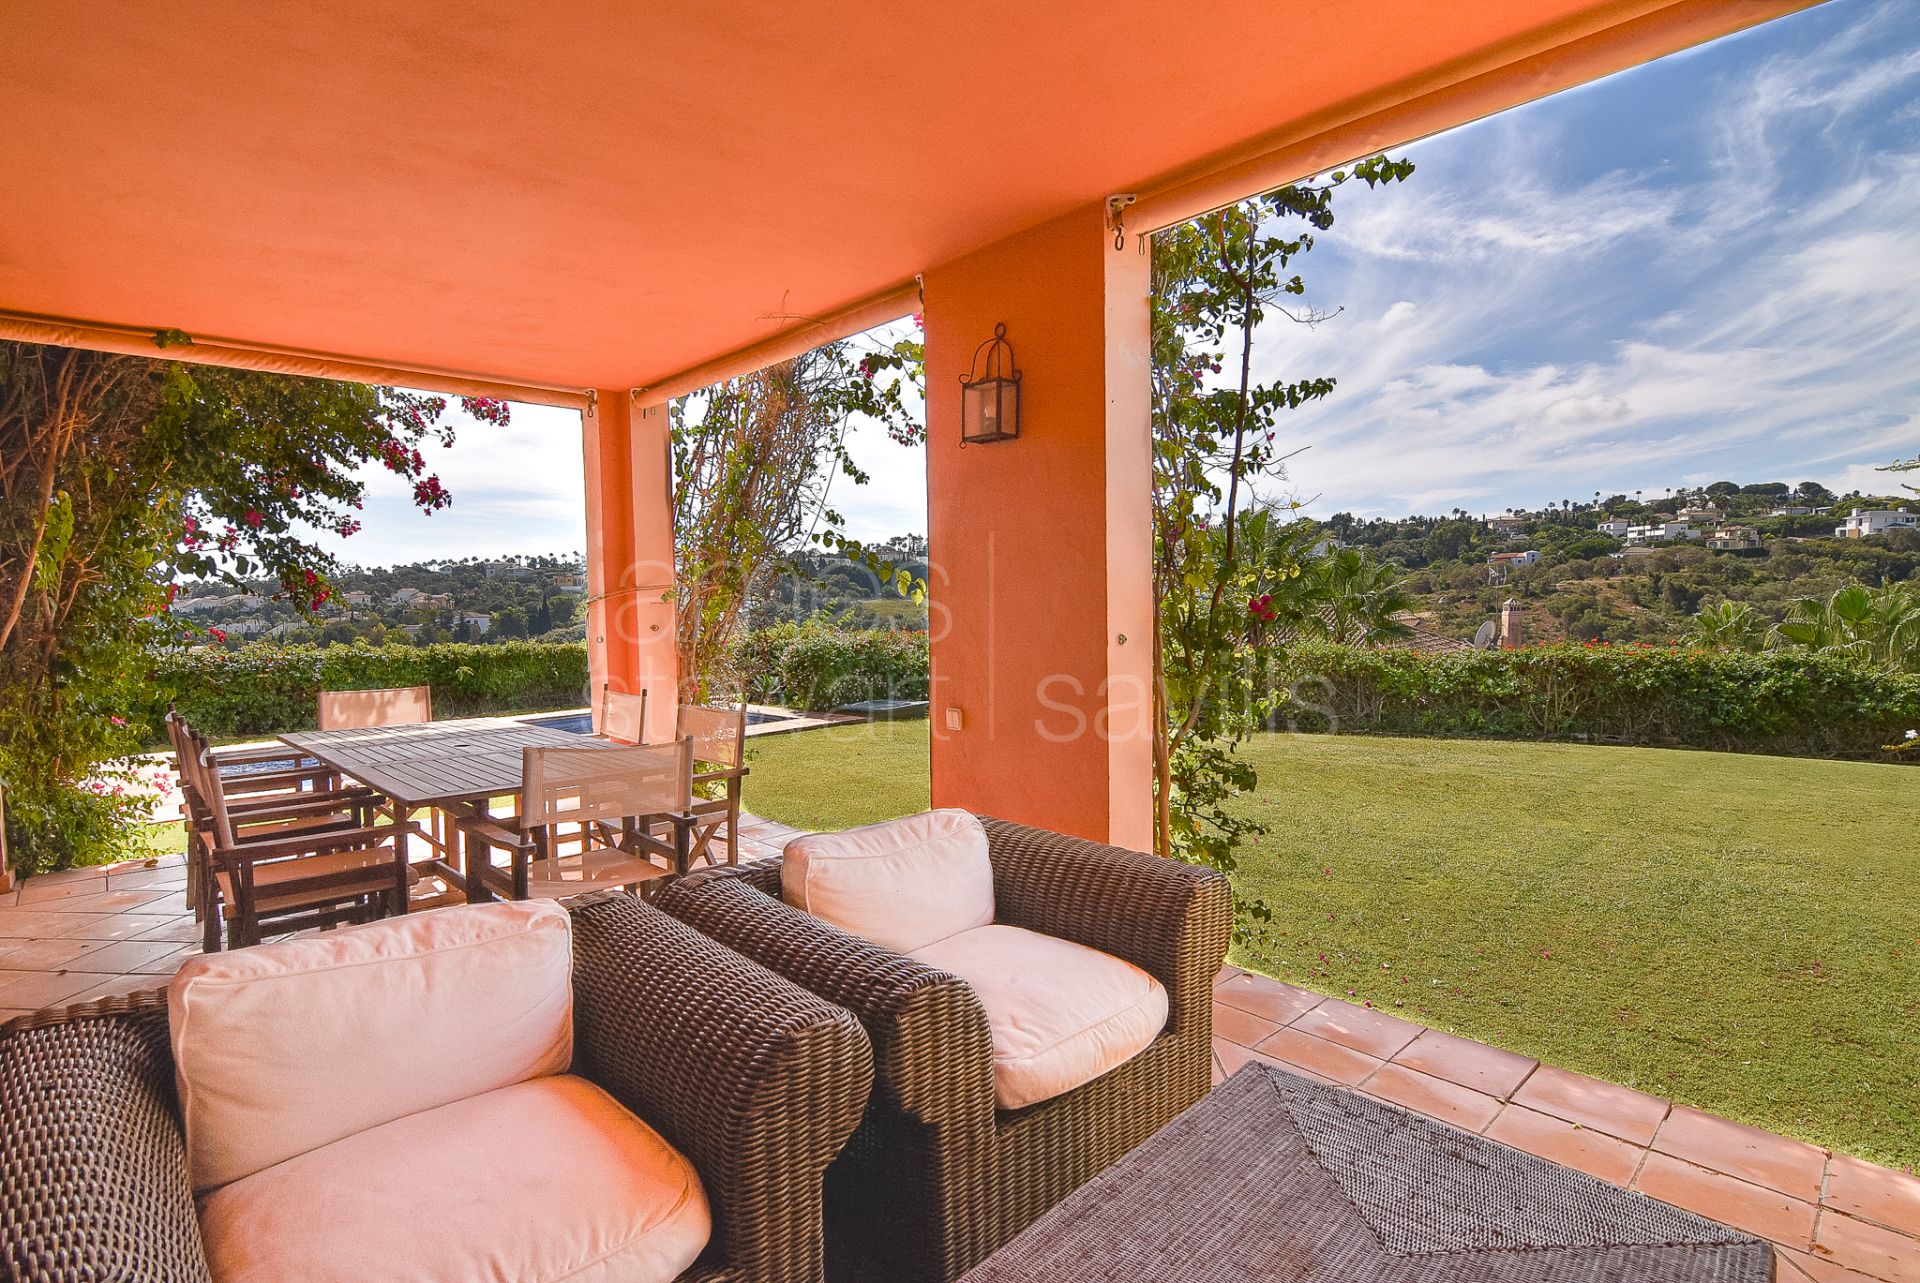 Elegant Semi-Detached Home with panoramc views in Sotogrande Alto